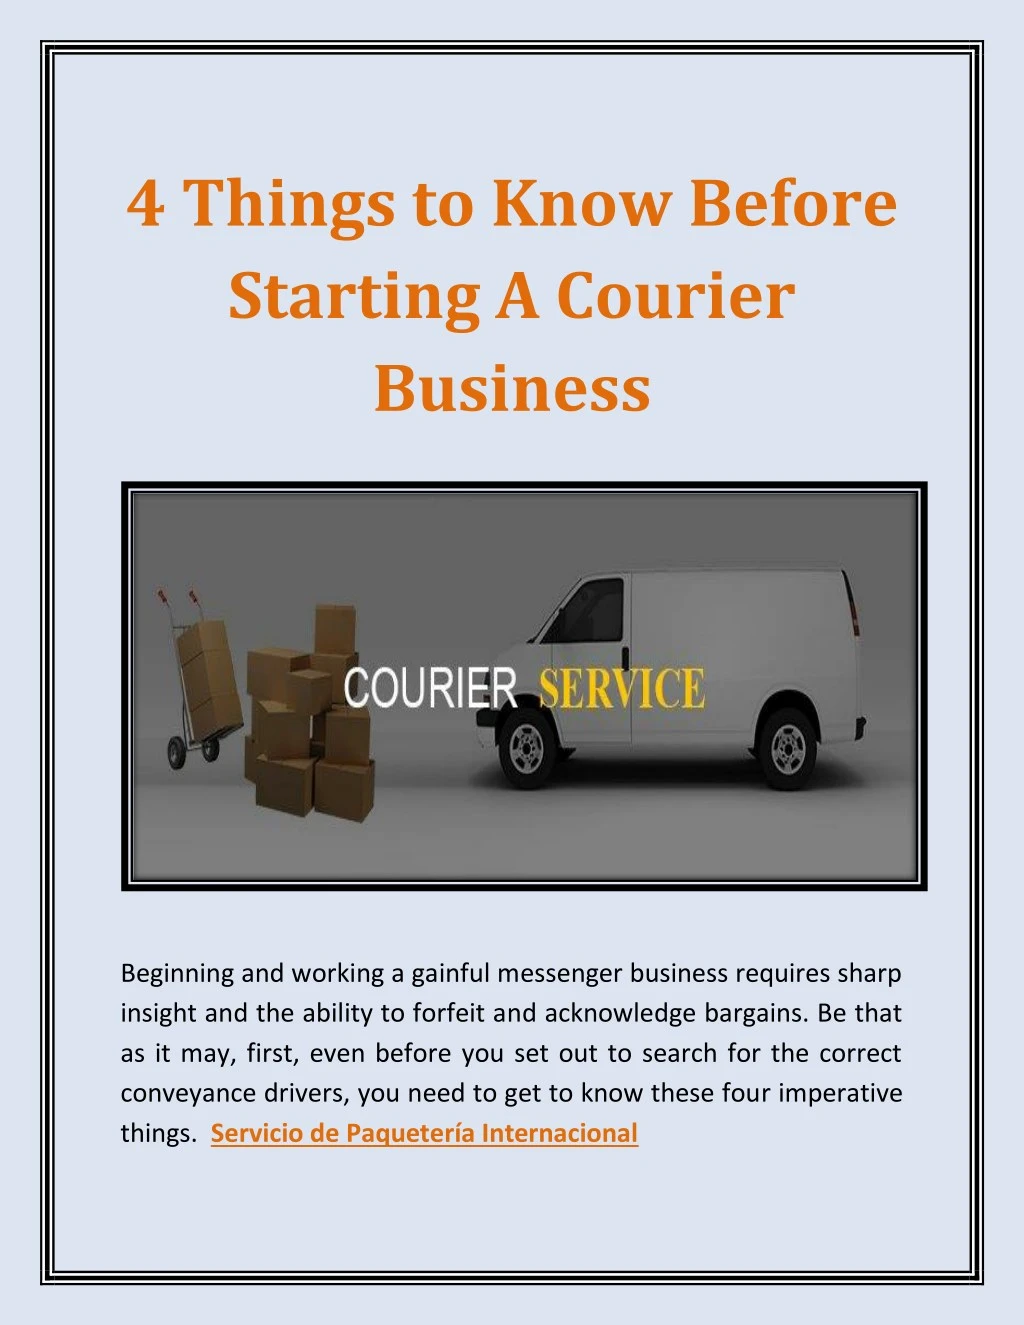 4 things to know before starting a courier